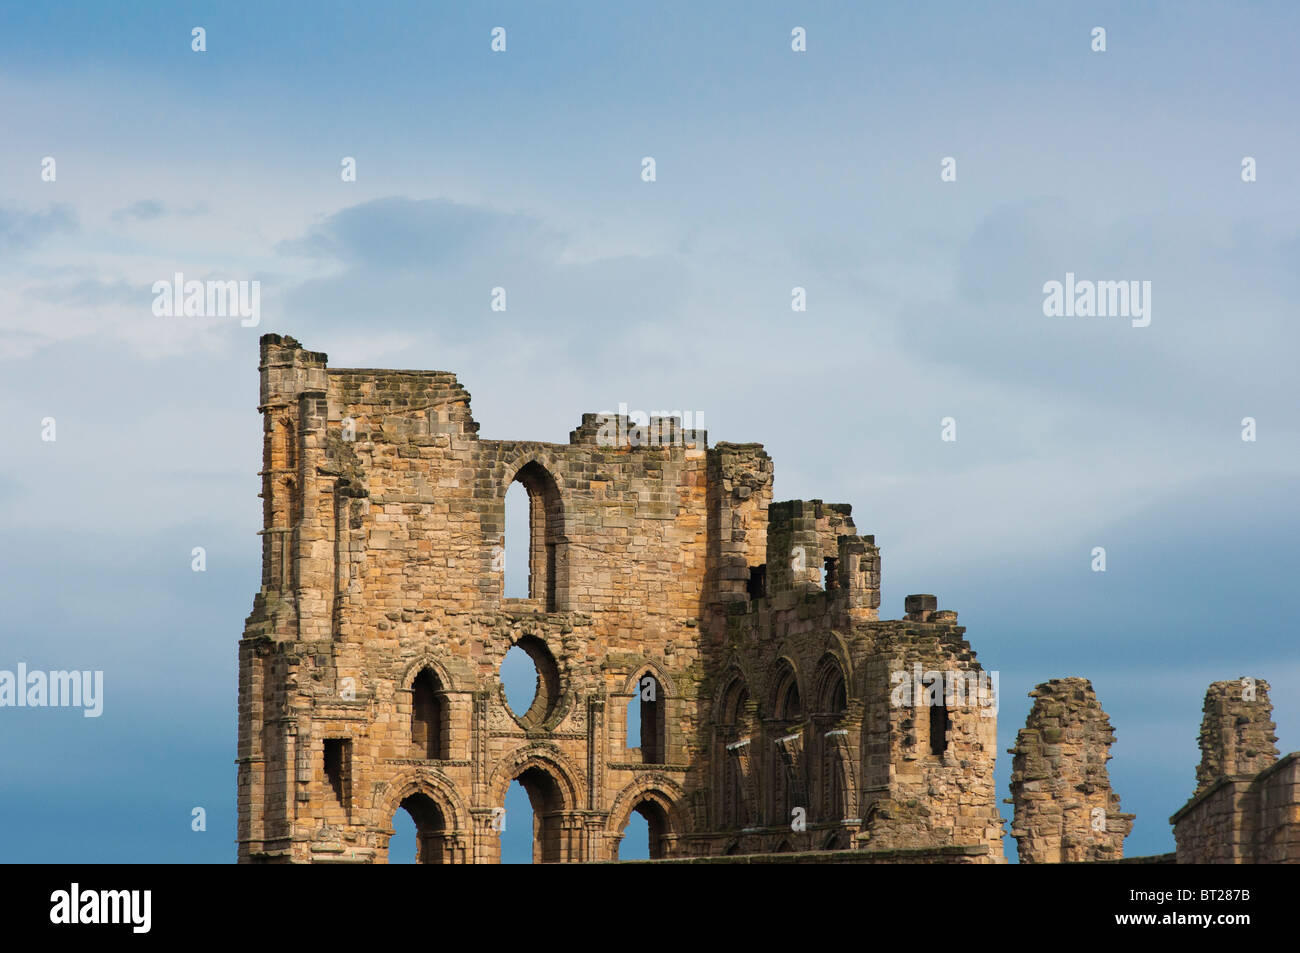 Picturesque ruins of Tynemouth Priory, Tynemouth, Tyne and Wear, England, UK. Stock Photo